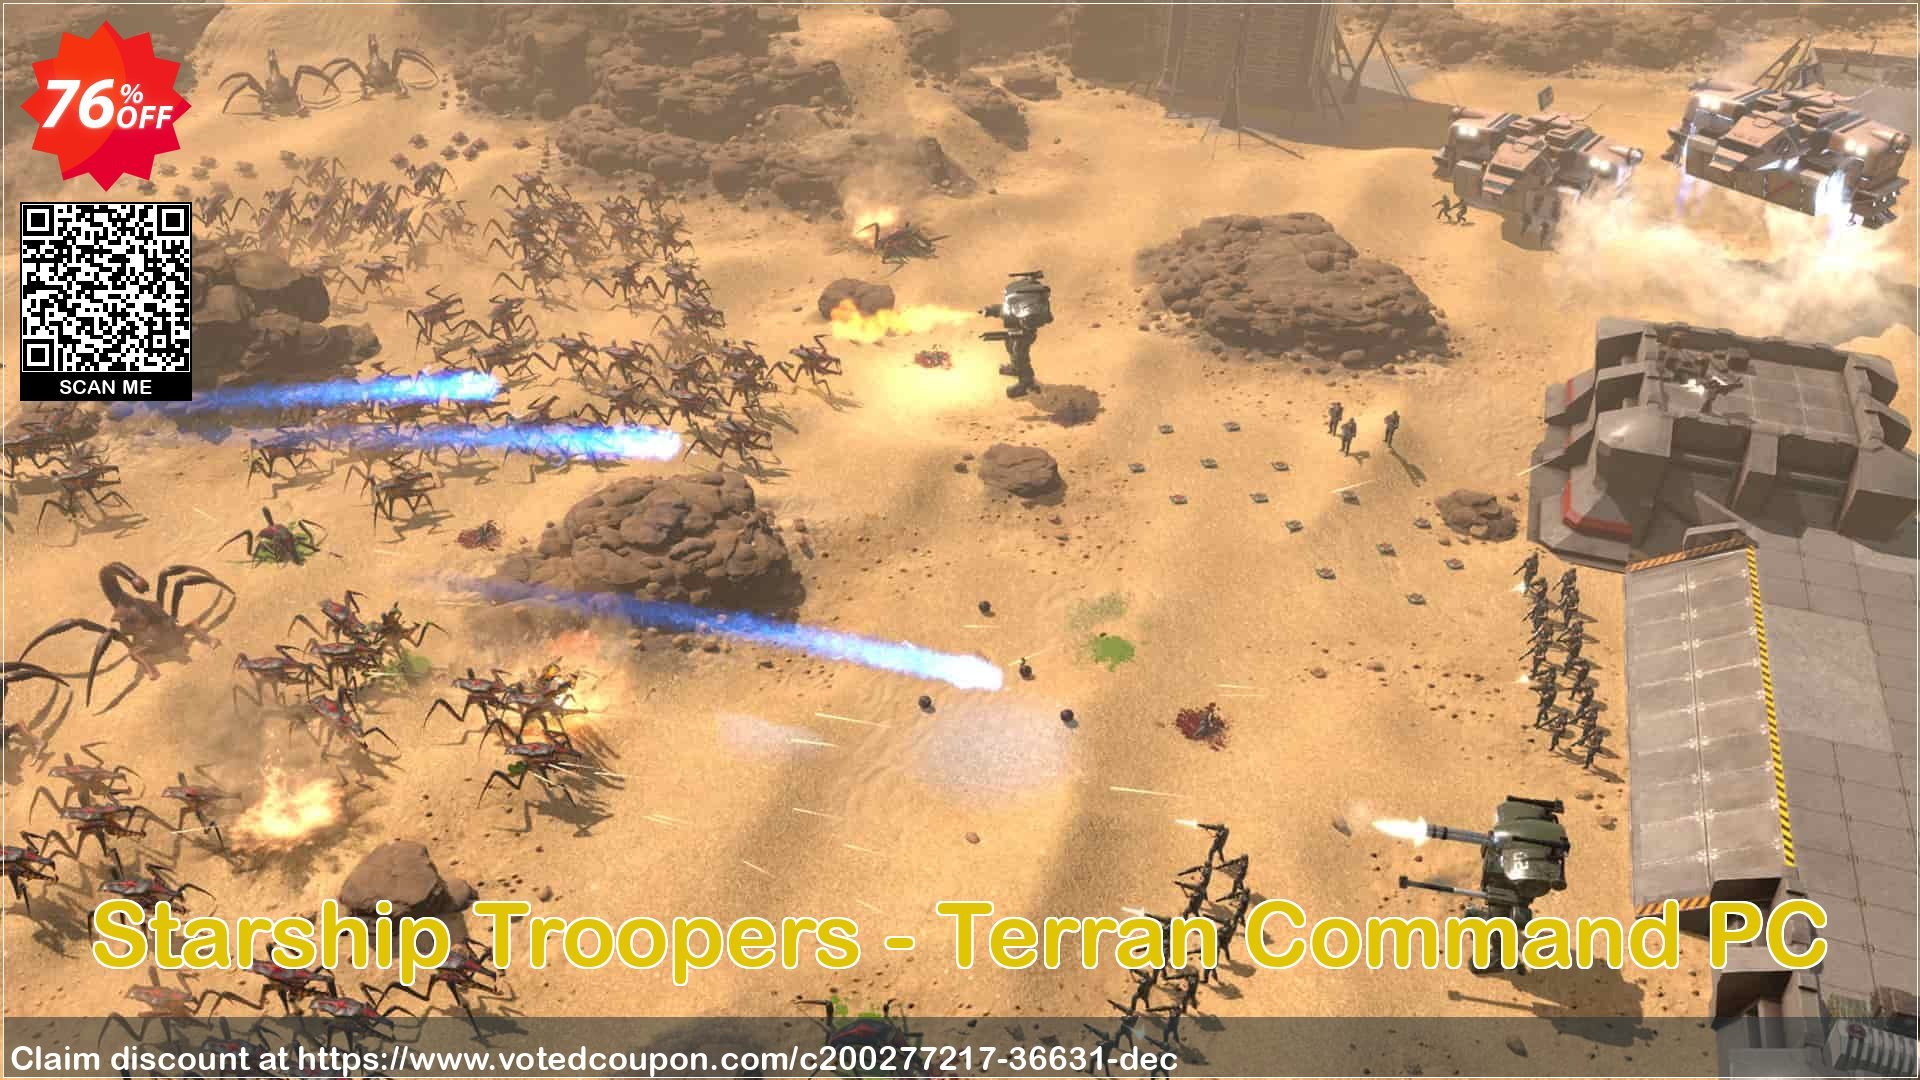 Starship Troopers - Terran Command PC Coupon Code May 2024, 76% OFF - VotedCoupon